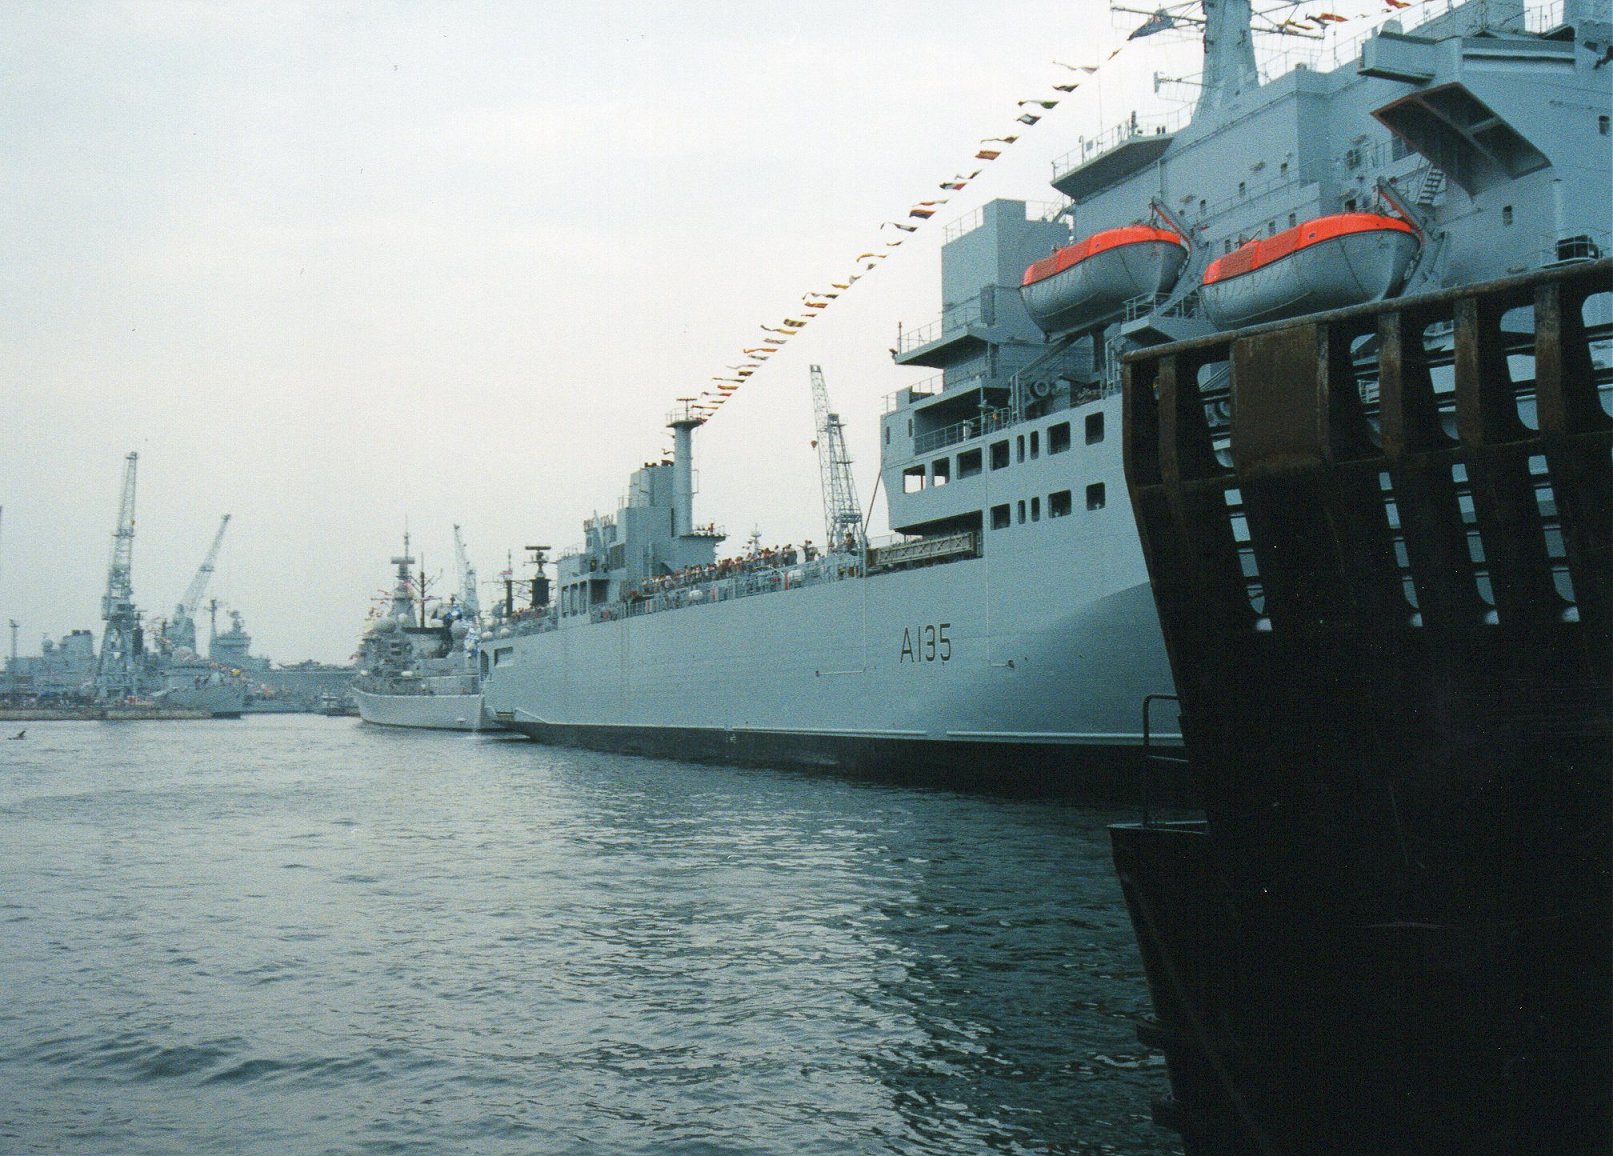 RFA Argus, primary casualty reception ship, Portsmouth 2001.